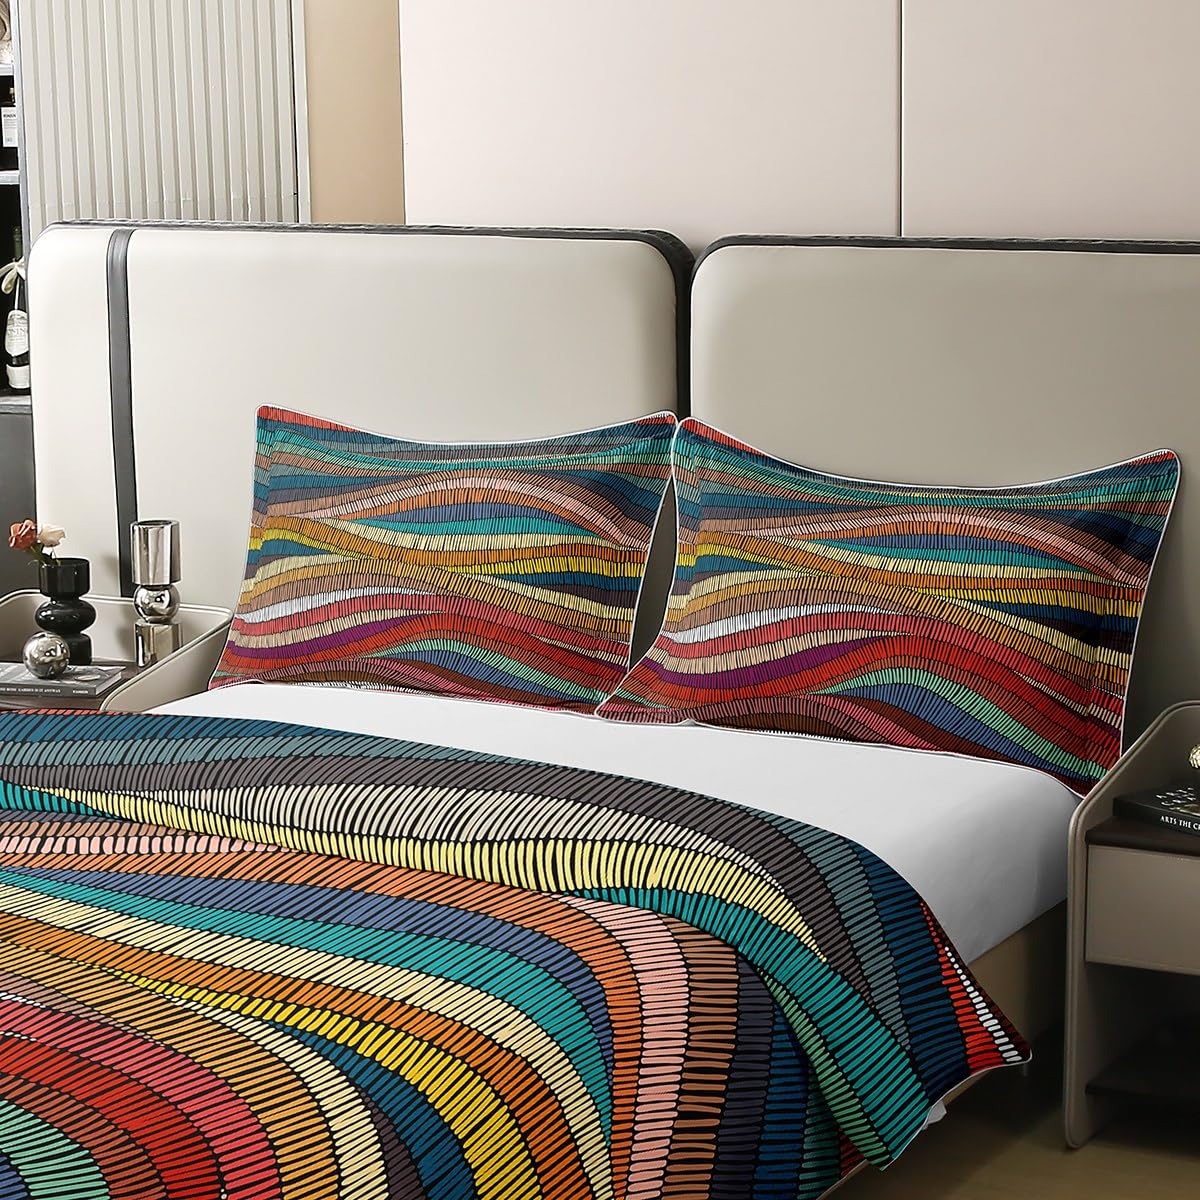 100% Cotton Boho Duvet Cover King Bohemian Wavy Bedding Set Rainbow Embroidered Waves Comforter Cover Geometric Tribal Ethnic Bedroom Decor Colorful Abstract Quilt Cover for Adult - image 4 of 6